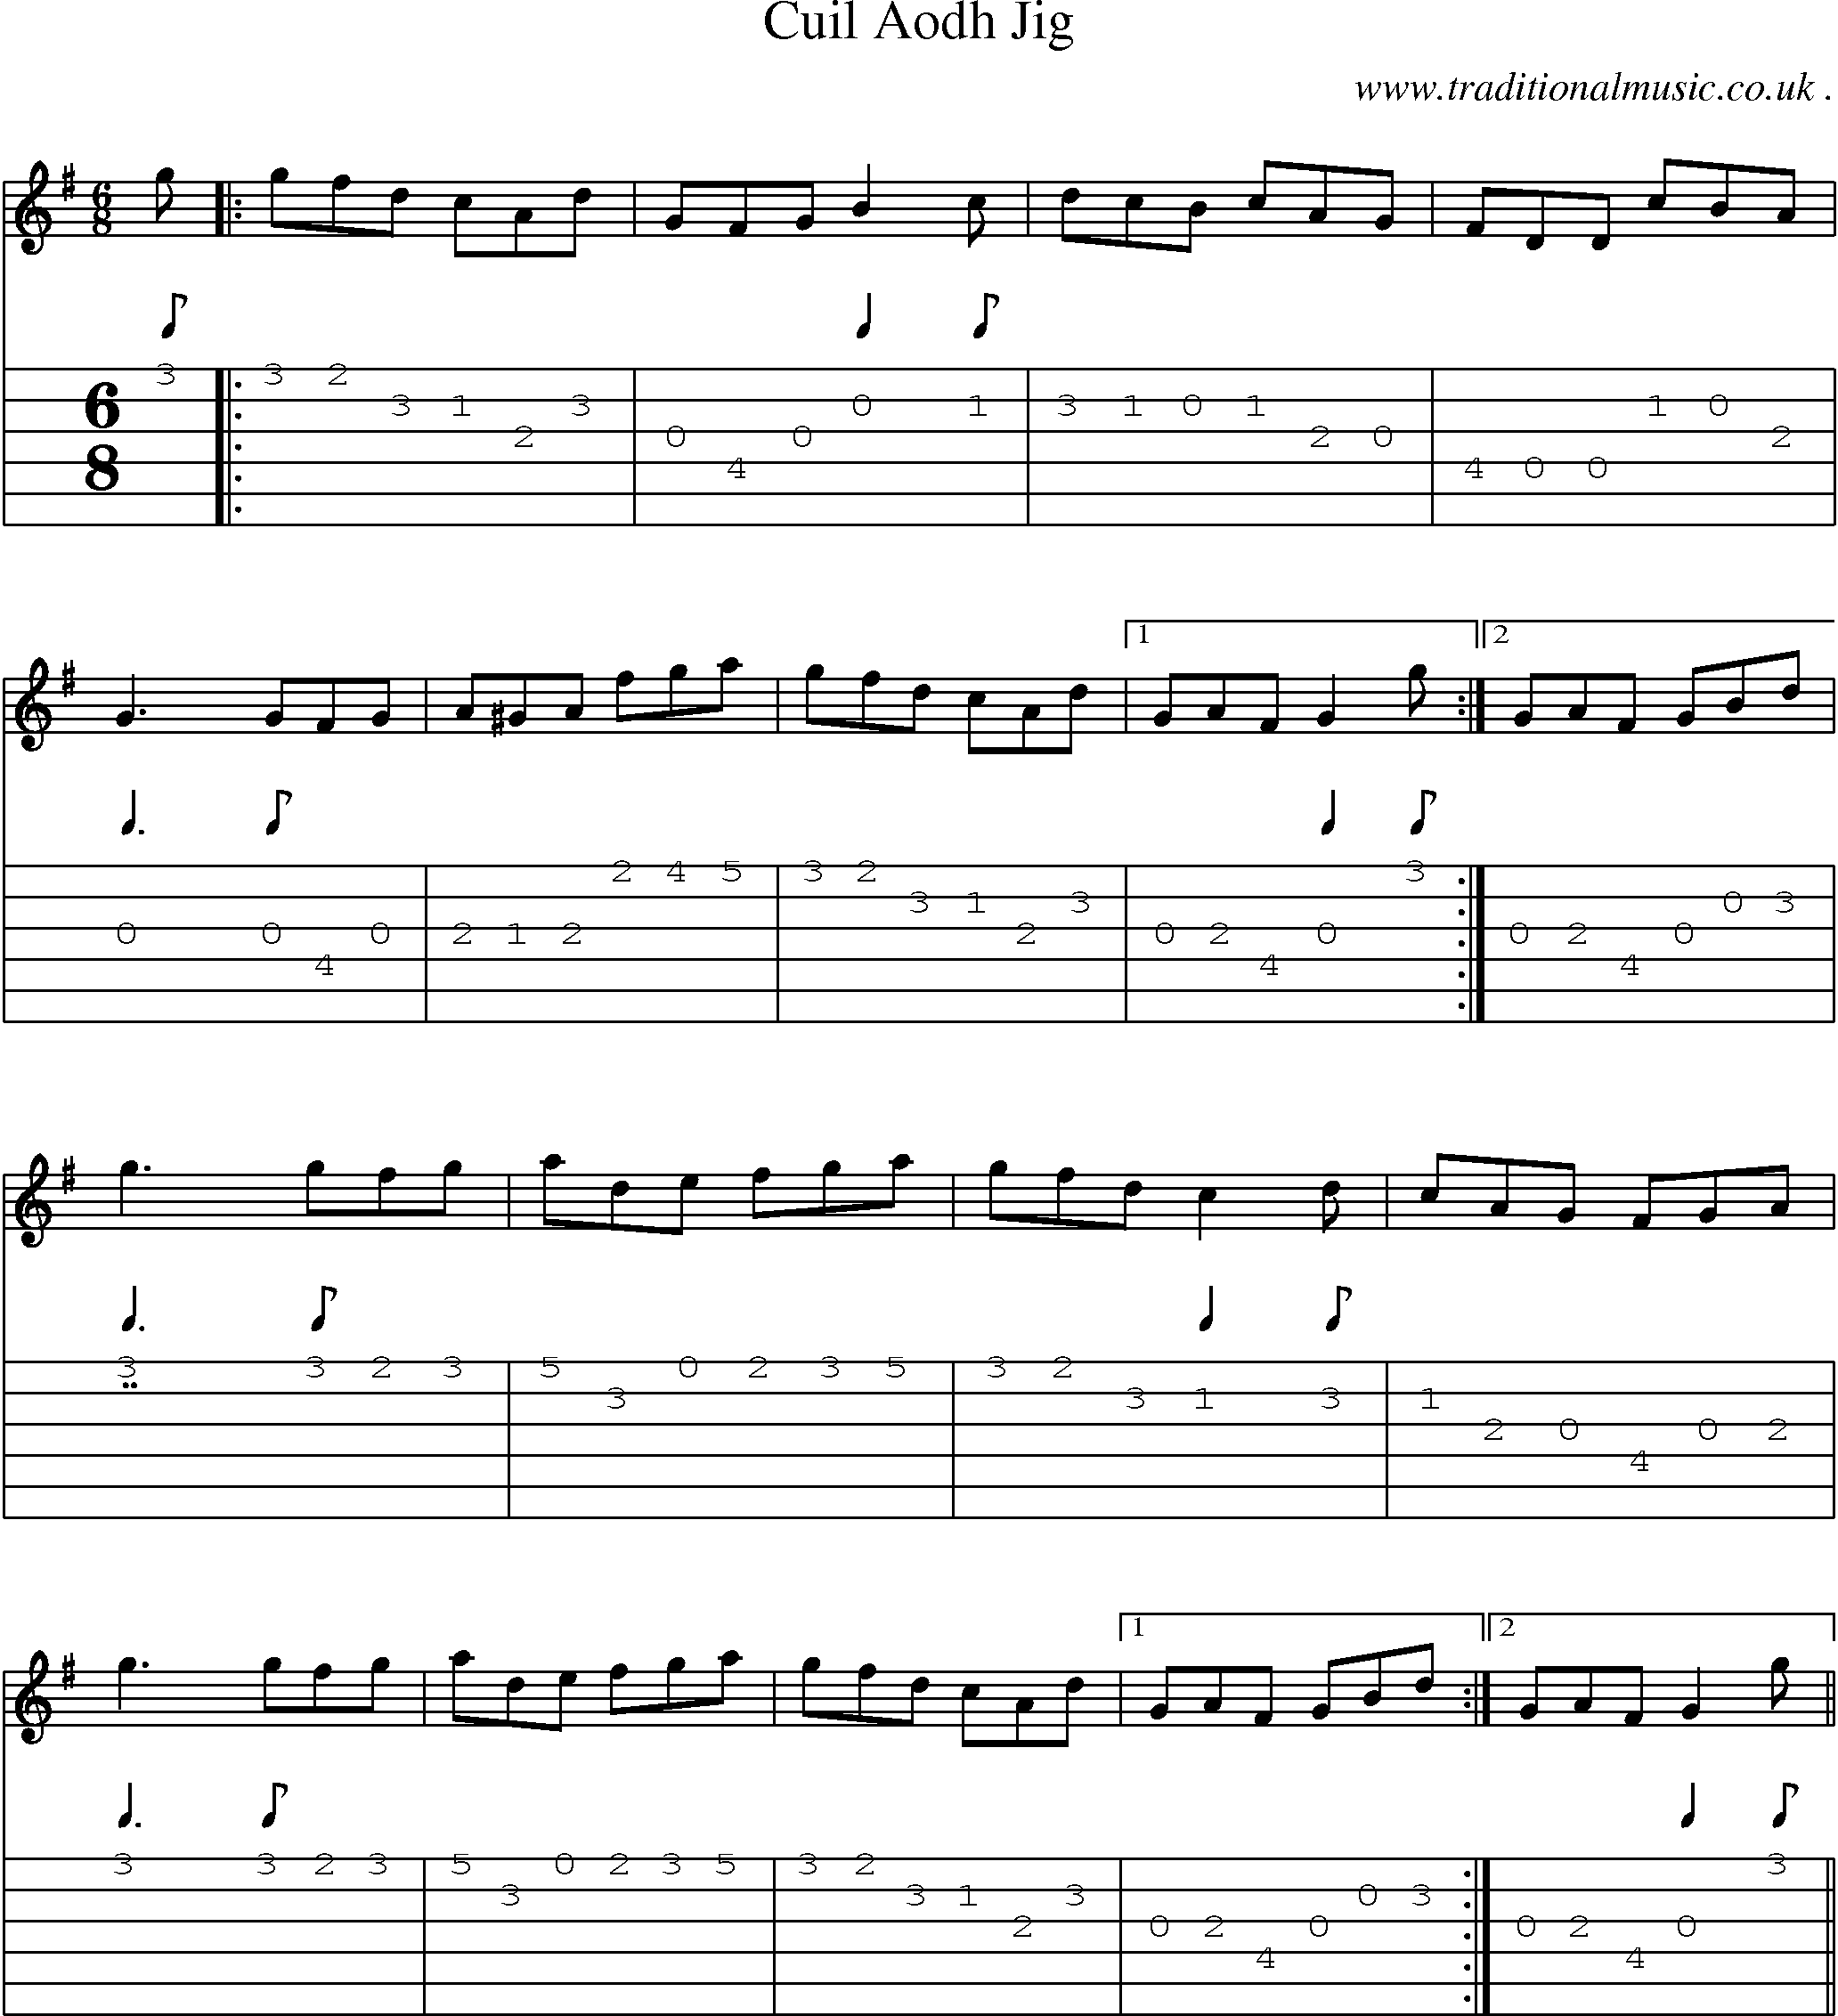 Sheet-Music and Guitar Tabs for Cuil Aodh Jig